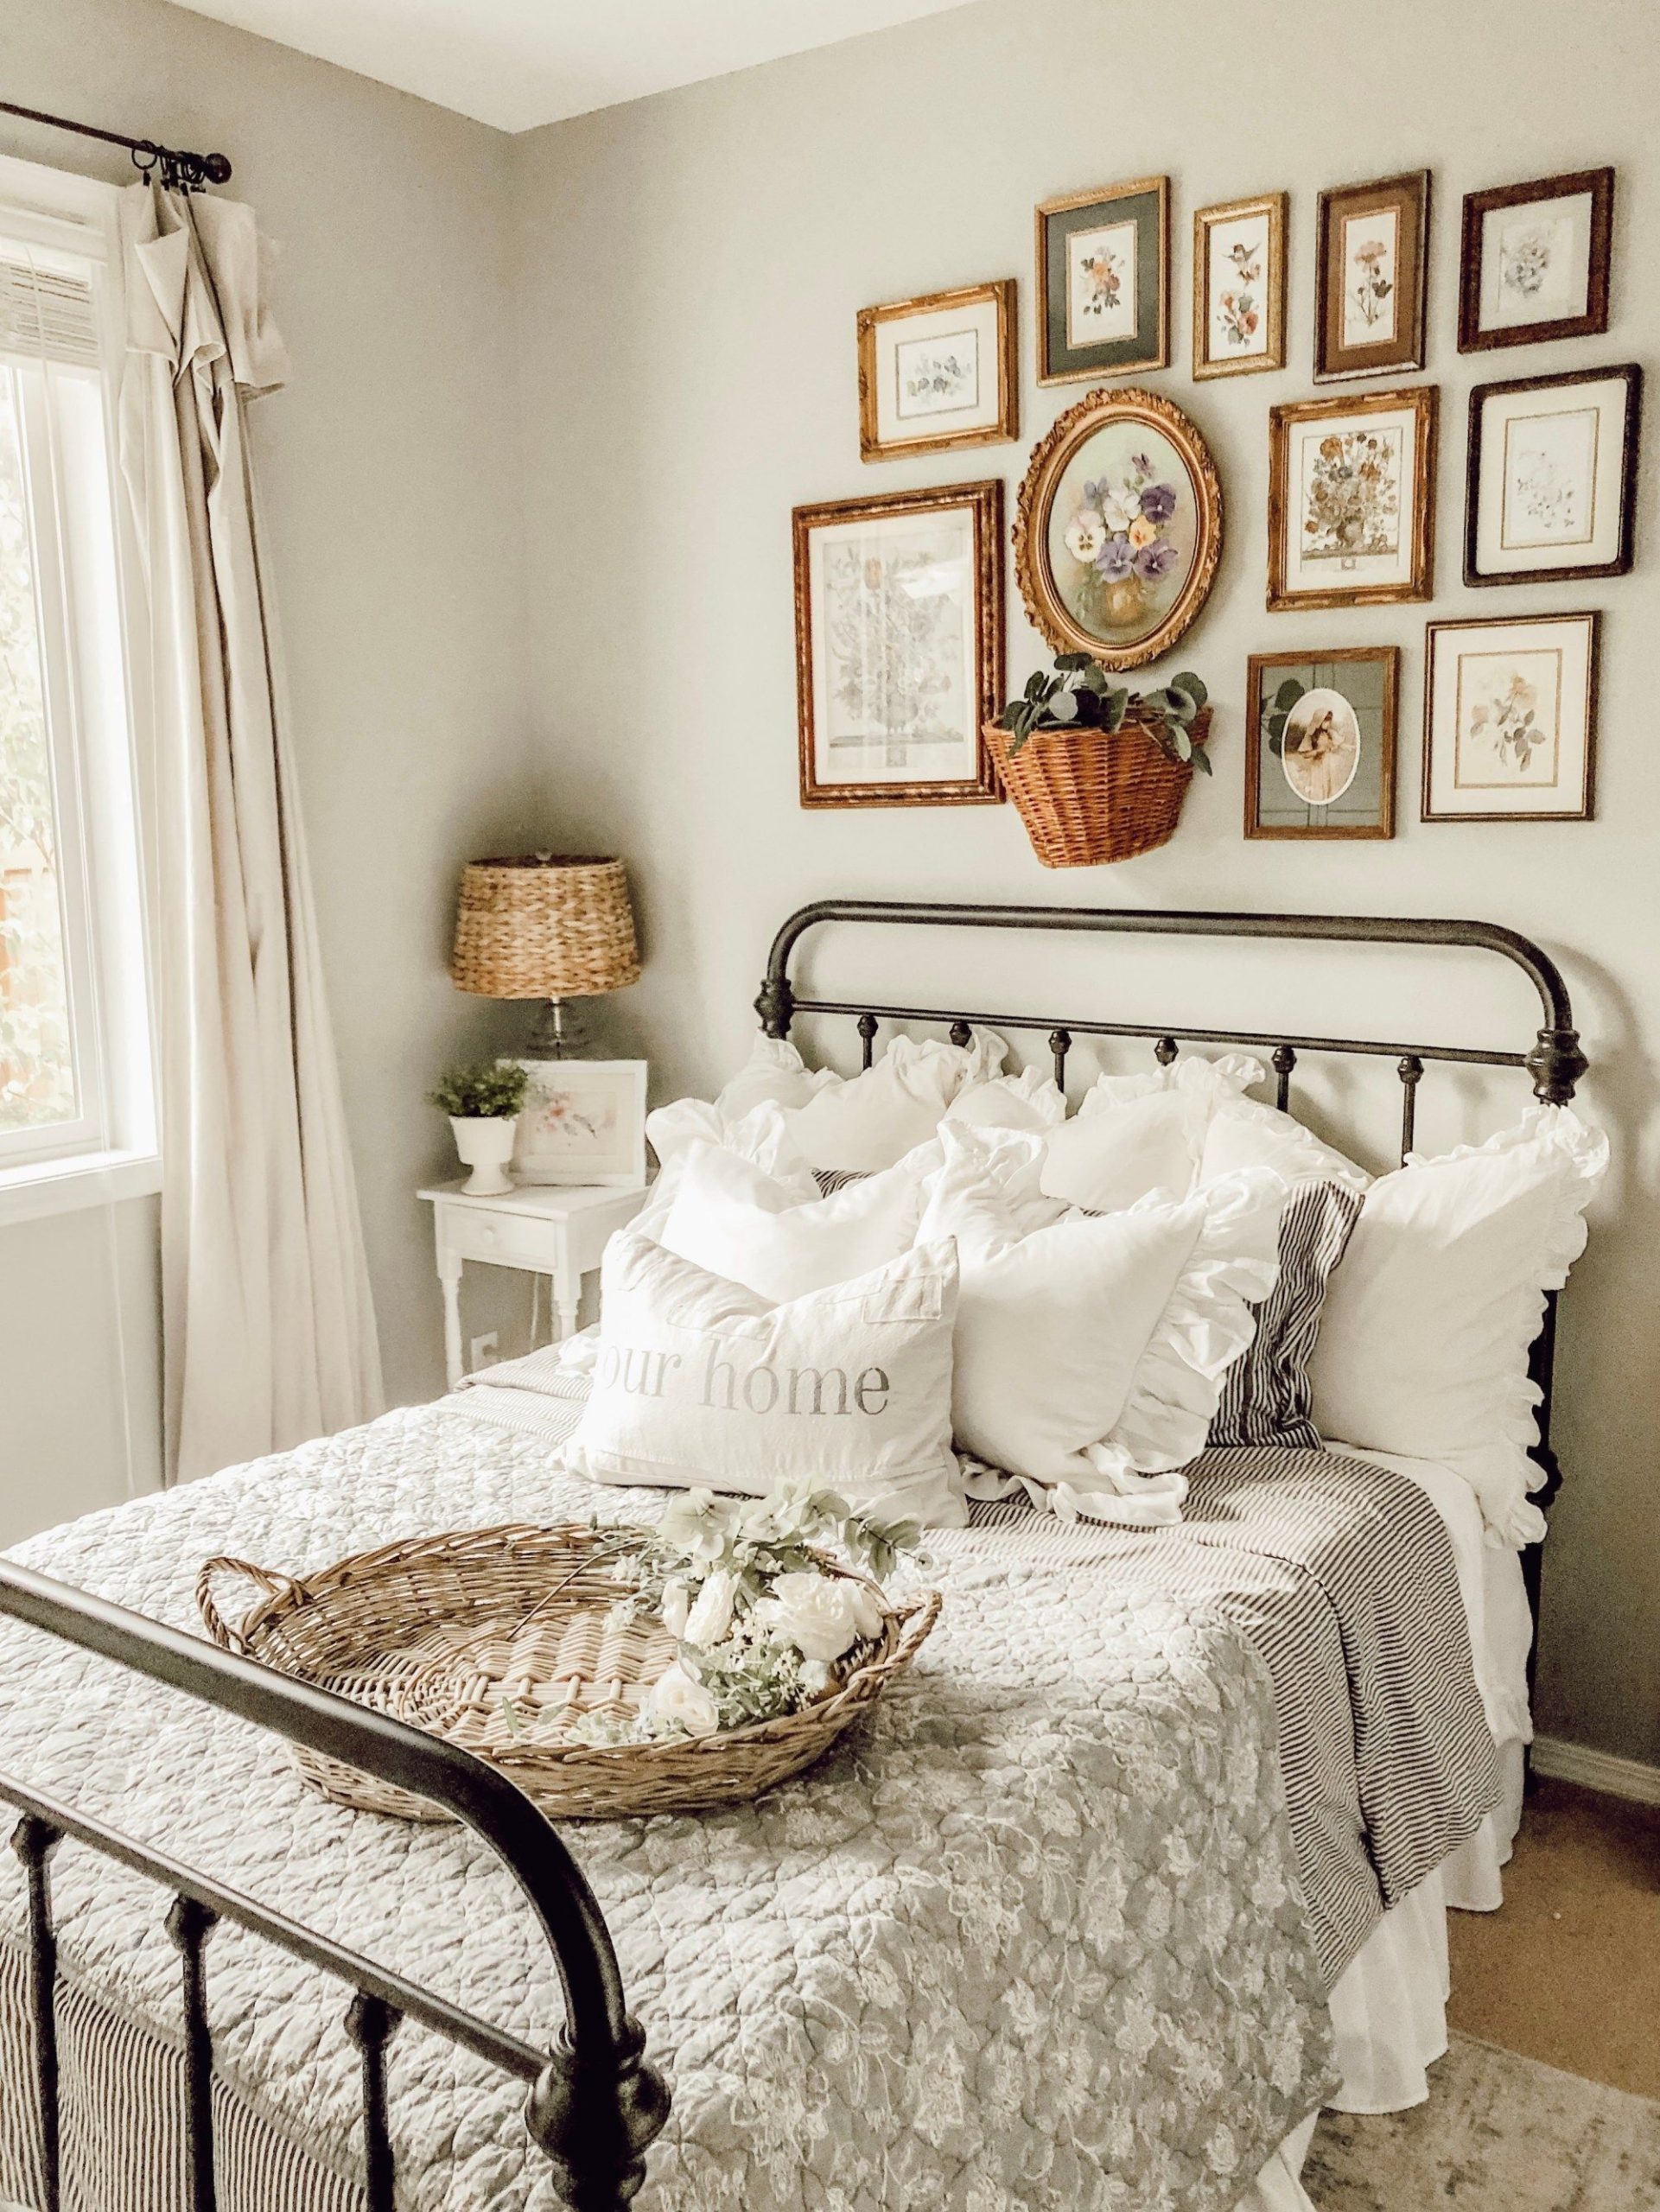 Vintage Bedroom Decor: Top Ideas For A Classic And Charming Space